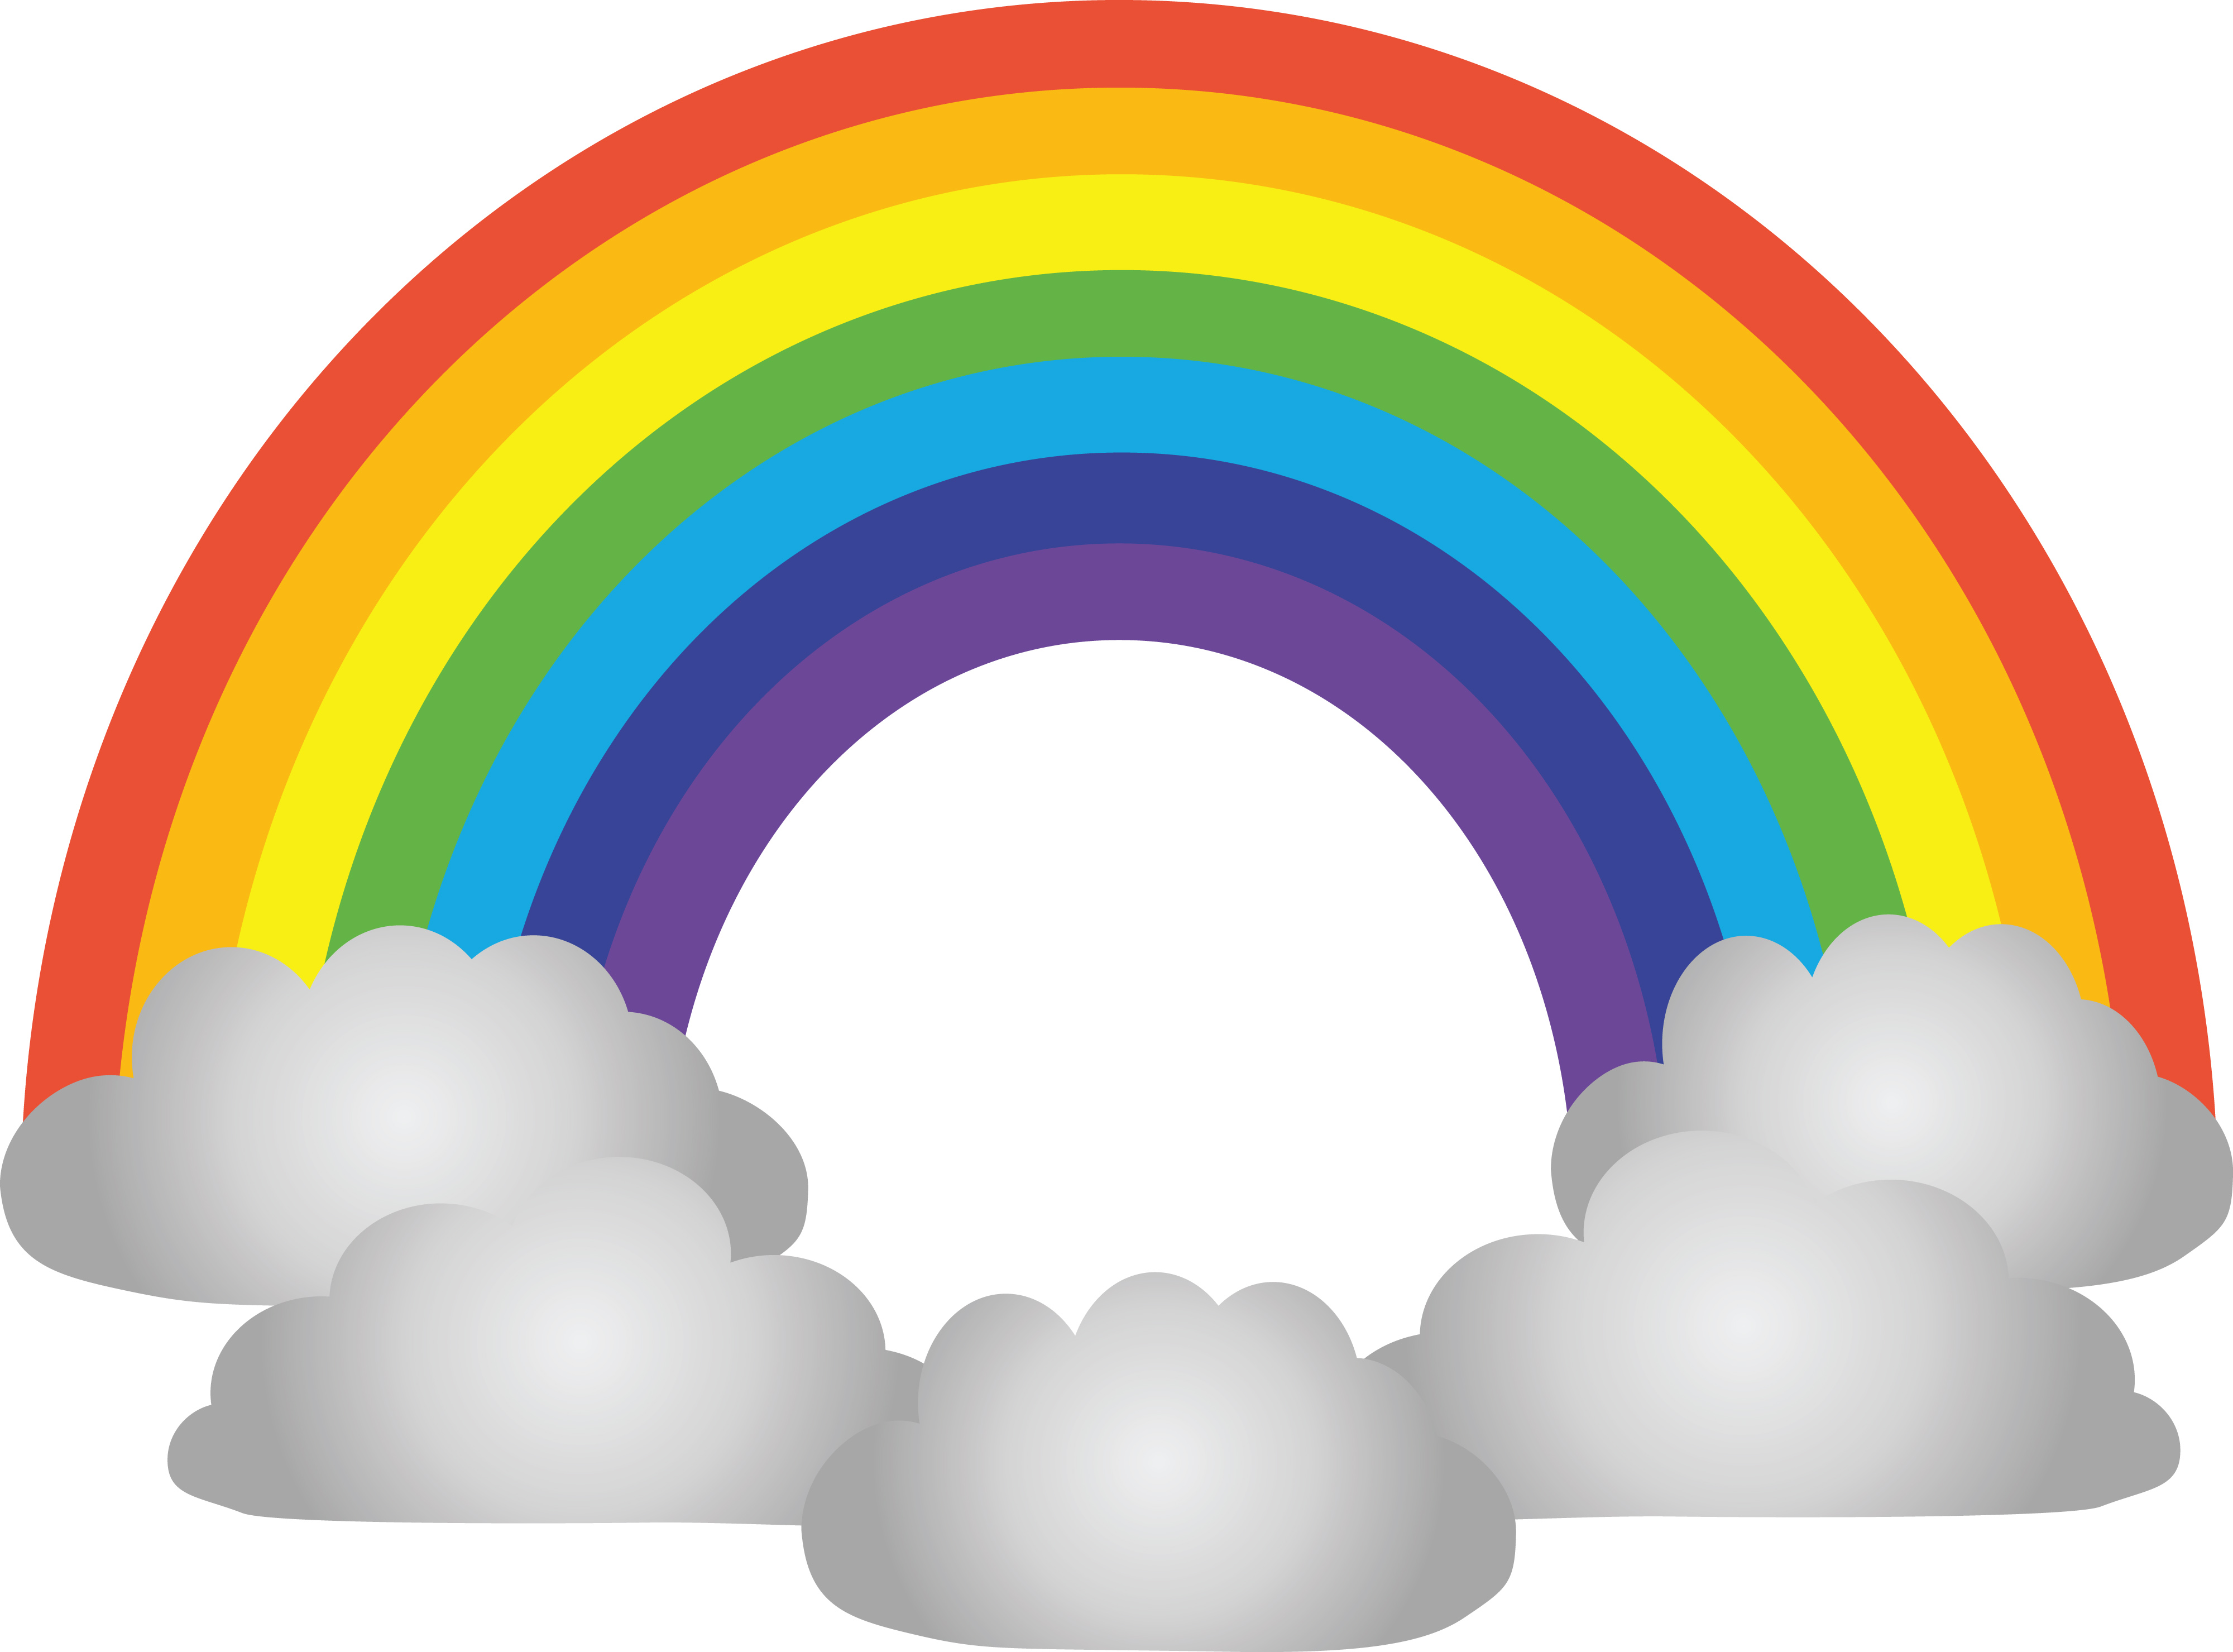 Download Free Clipart Of a rainbow and clouds